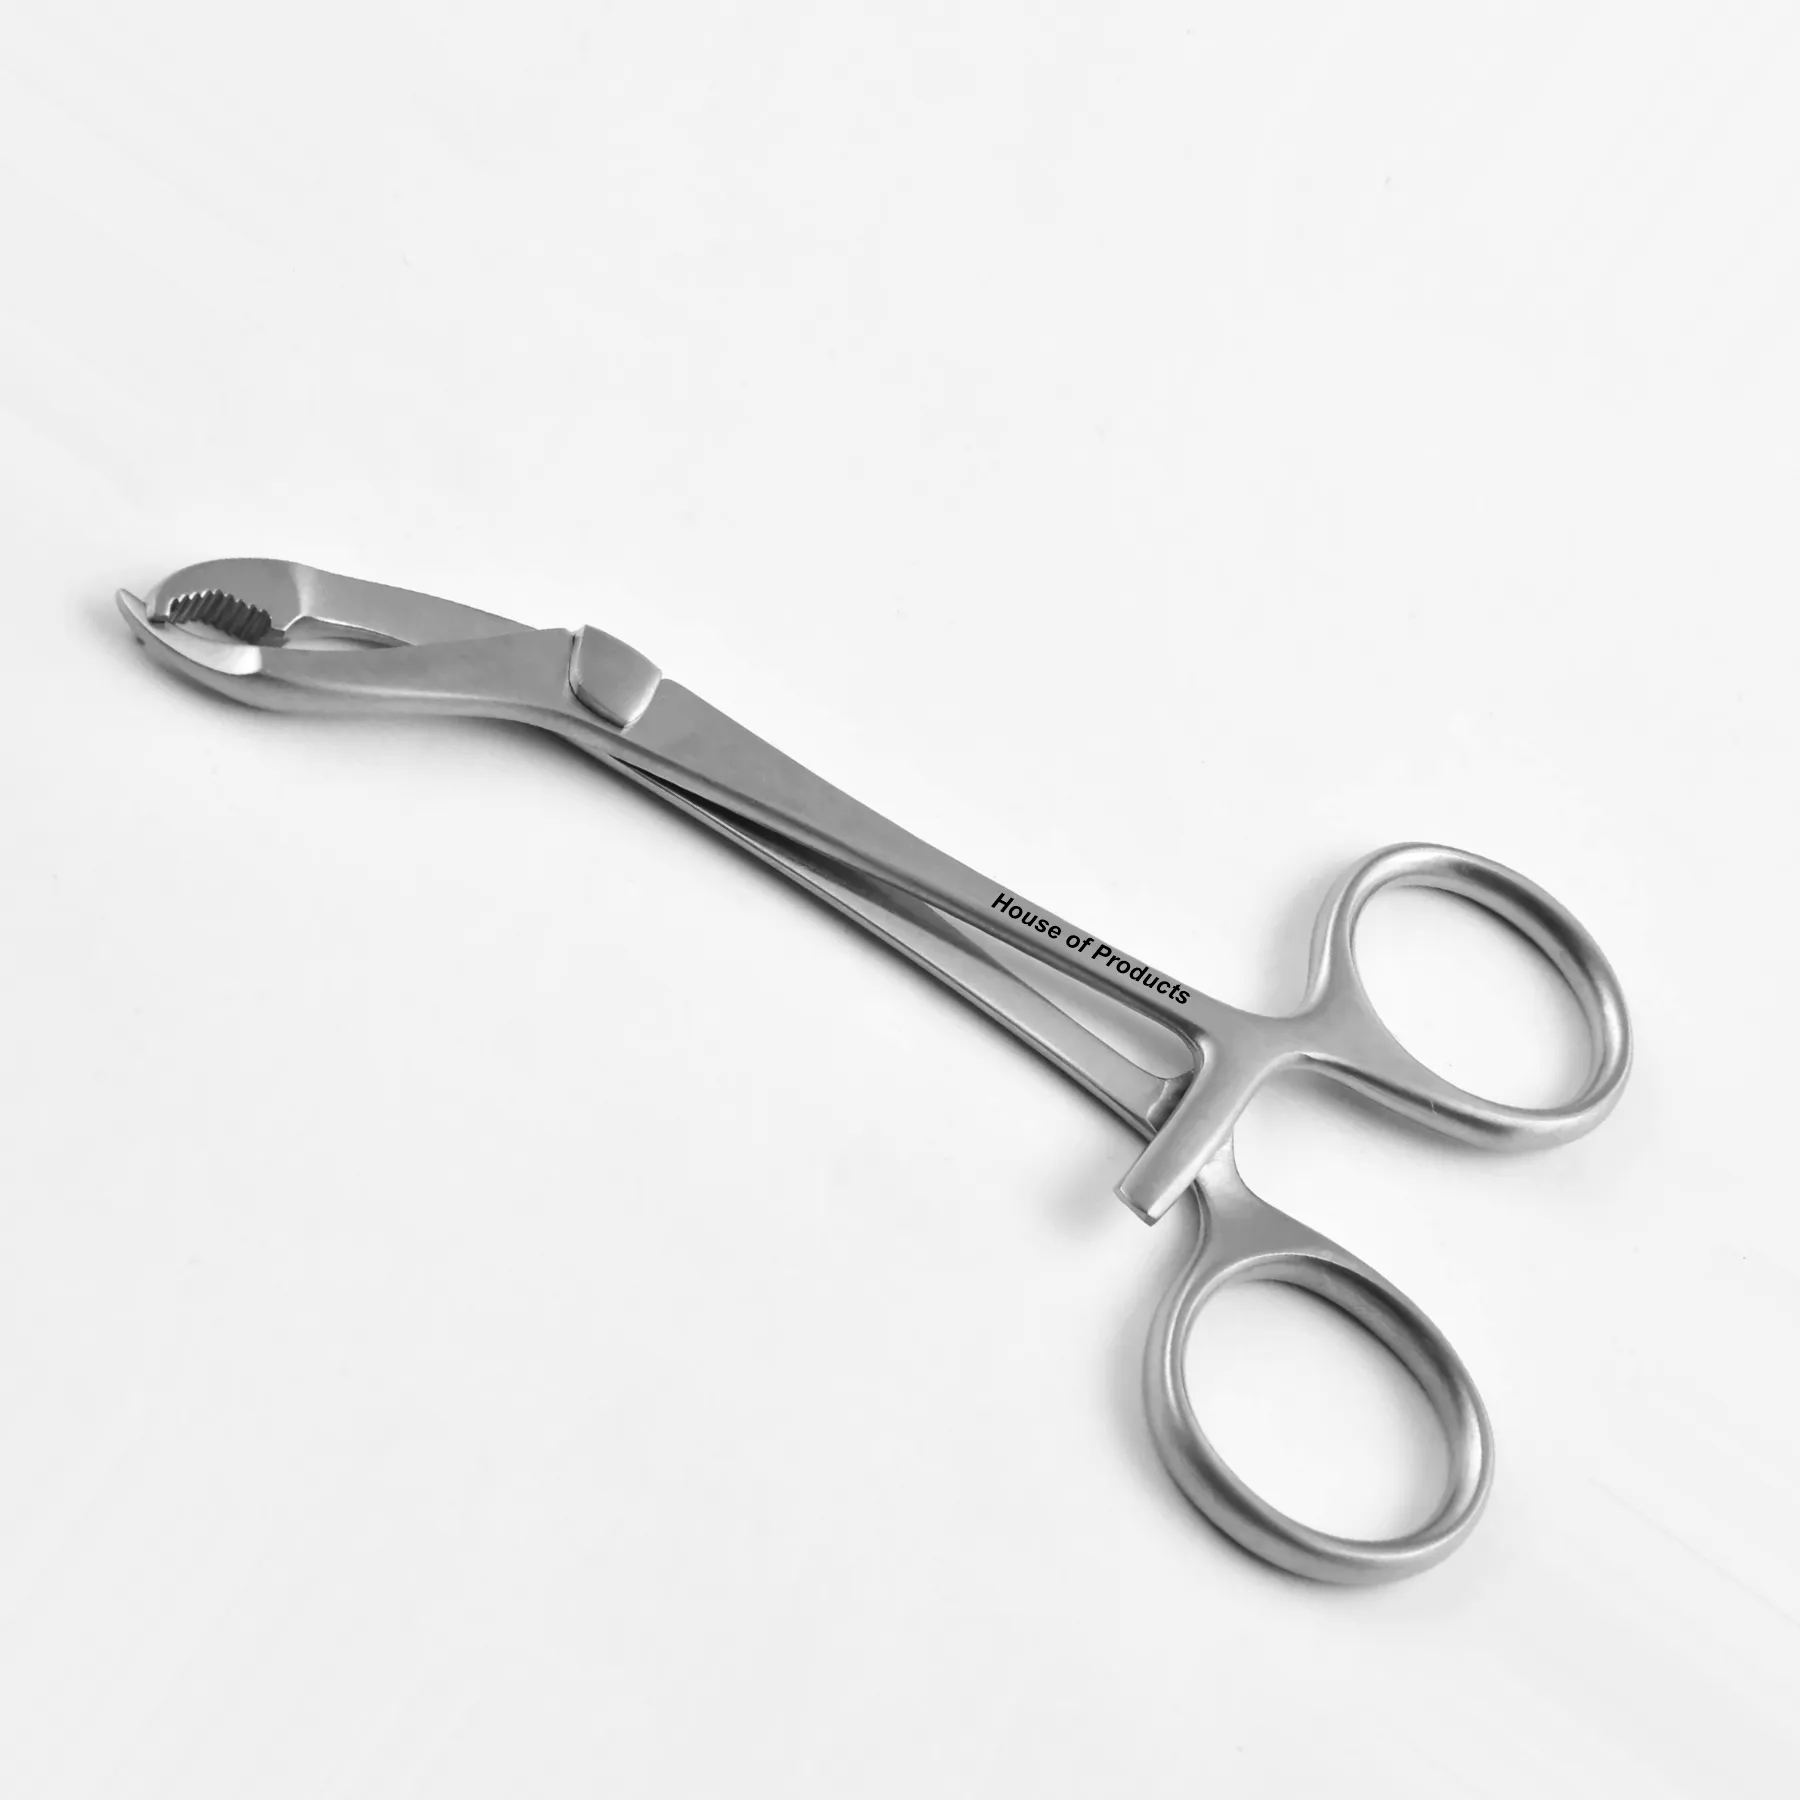 Bone Holding Forceps Verbrugge 14Cm Surgical Instruments CE ISO Certified Surgical Forceps